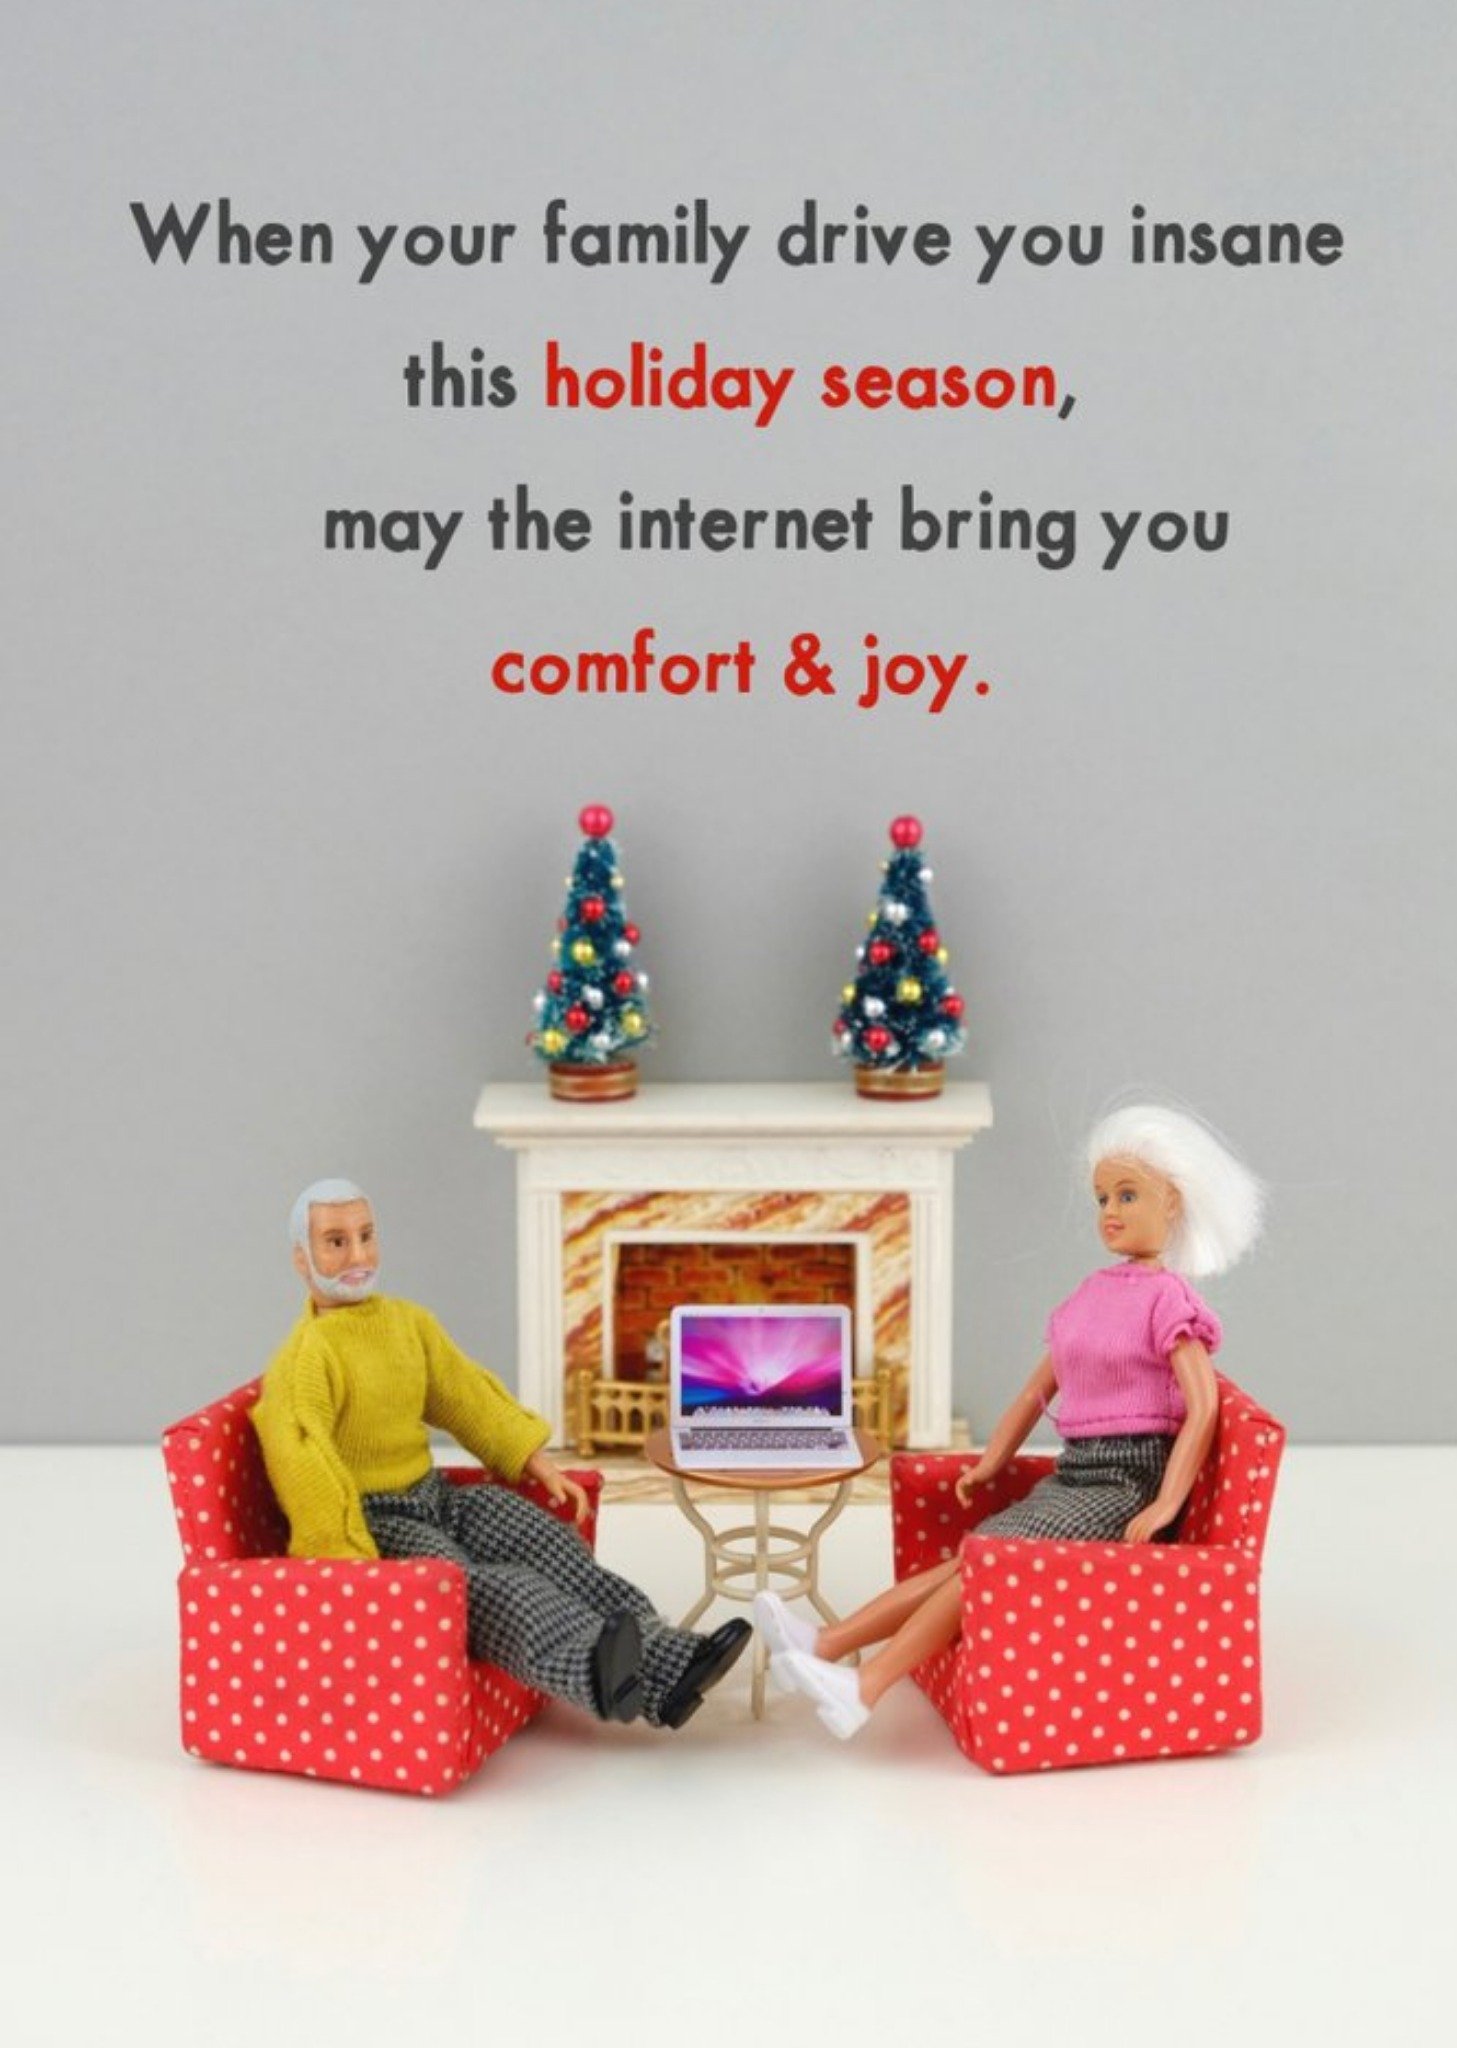 Bold And Bright Funny Dolls May The Internet Bring You Comfort And Joy Christmas Card Ecard